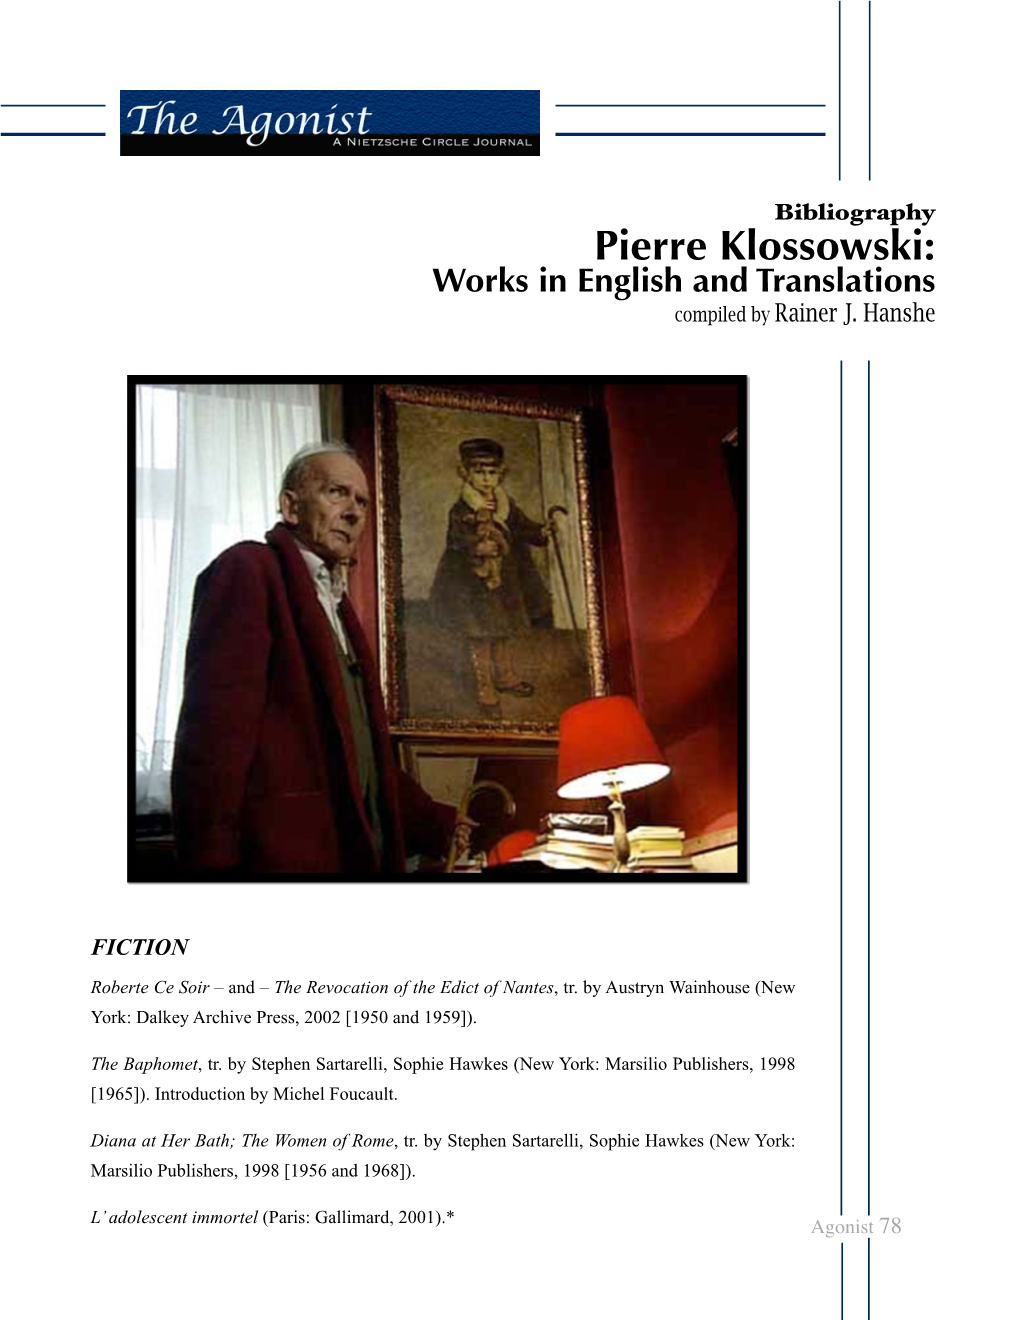 Pierre Klossowski: Works in English and Translations Compiled by Rainer J